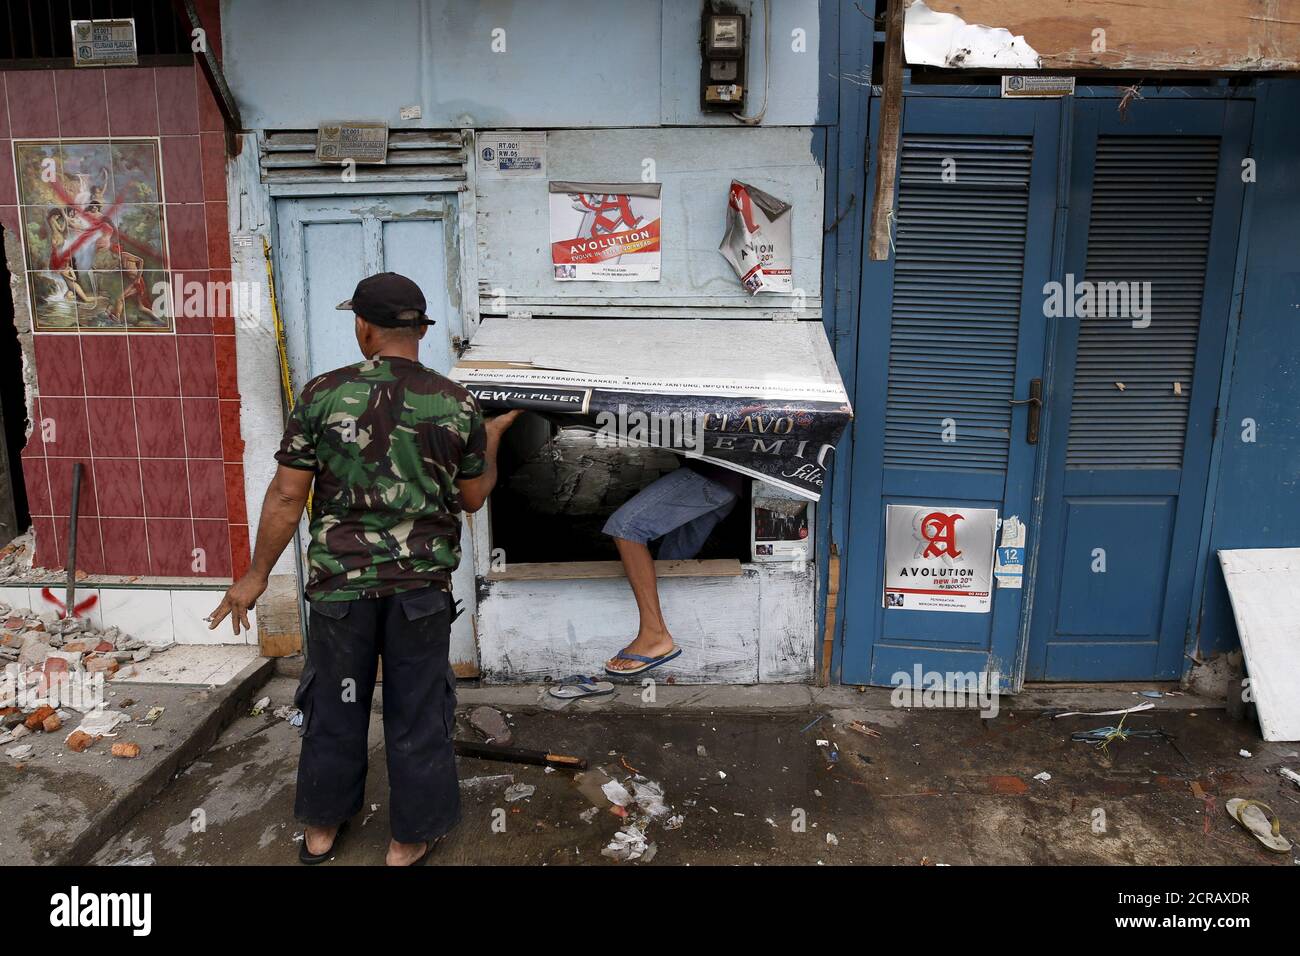 Men enter a shop to gain access to a dwelling behind to remove scrap  building materials in the Kalijodo red-light district in Jakarta, Indonesia  February 26, 2016. Indonesia aims to shutdown all